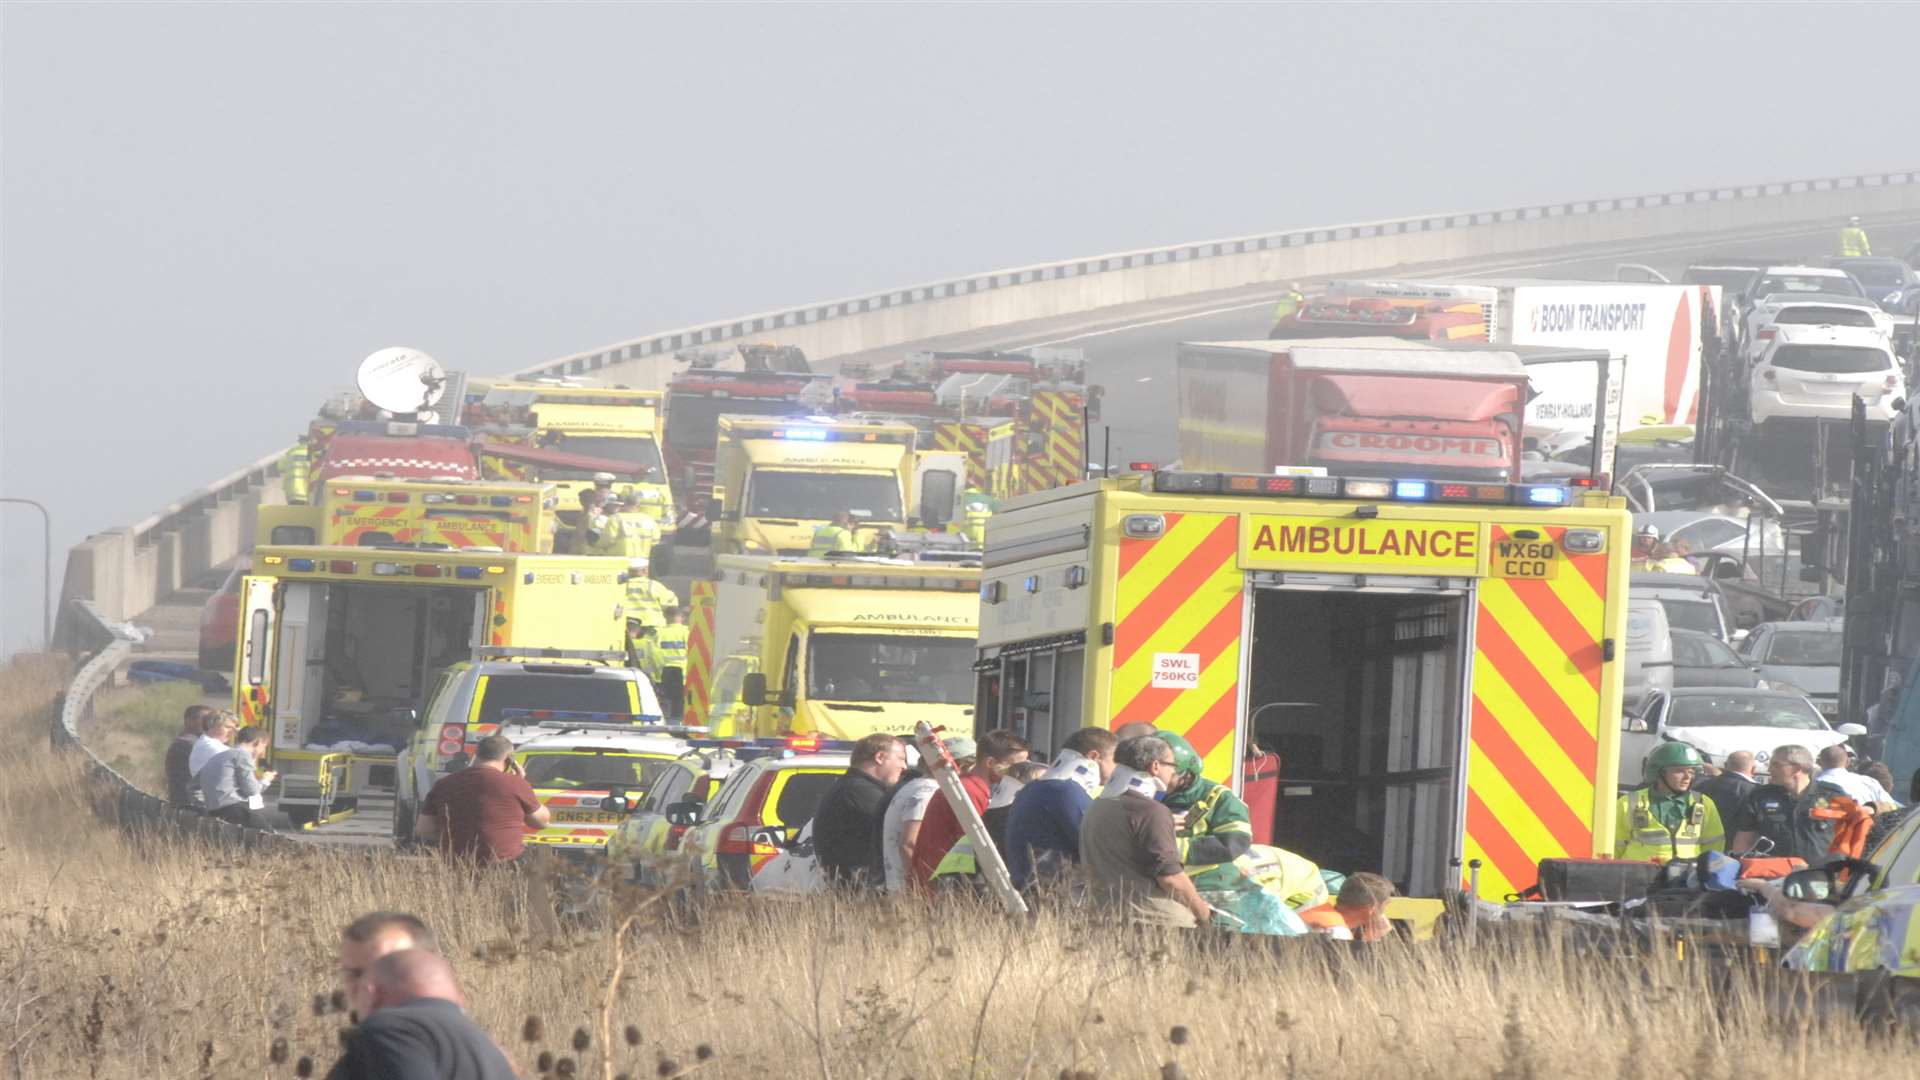 The Sheppey Crossing on the day of the 150 vehicle pile-up